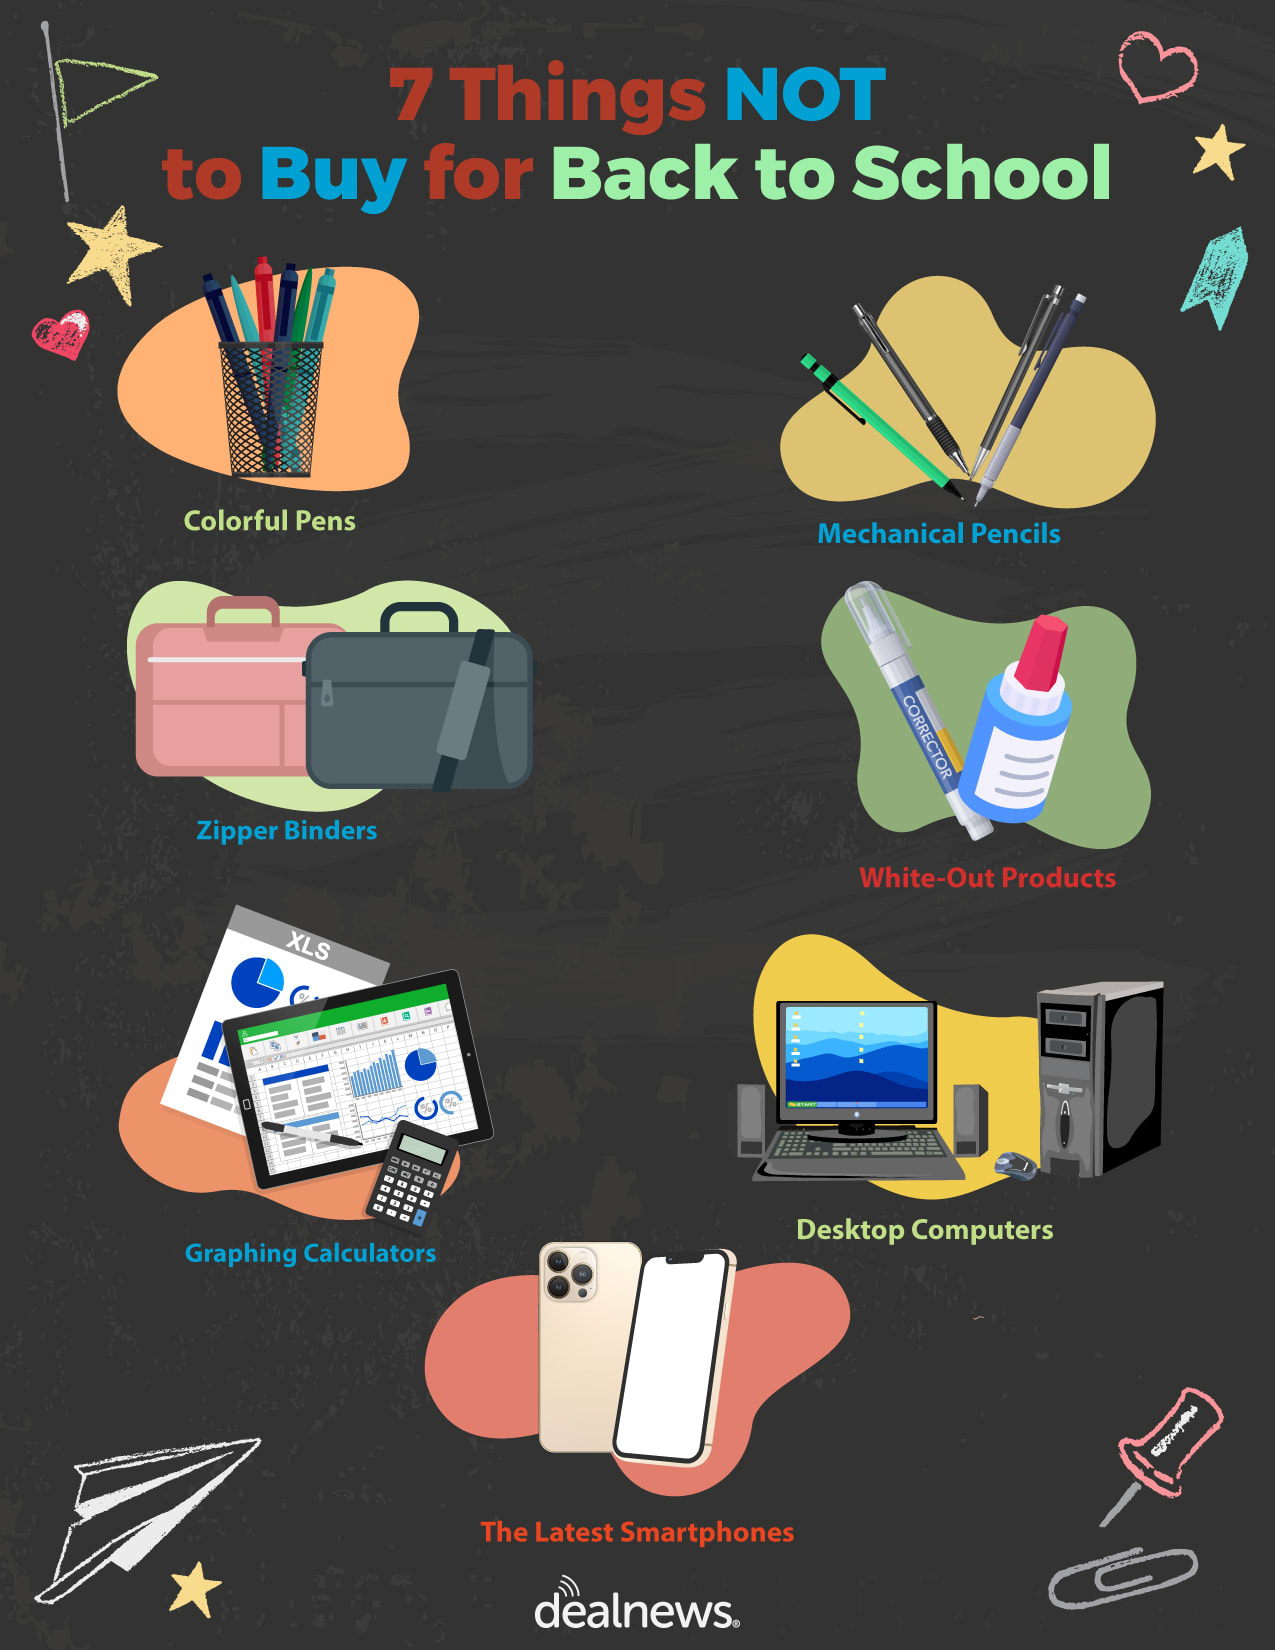 items not to buy for back to school